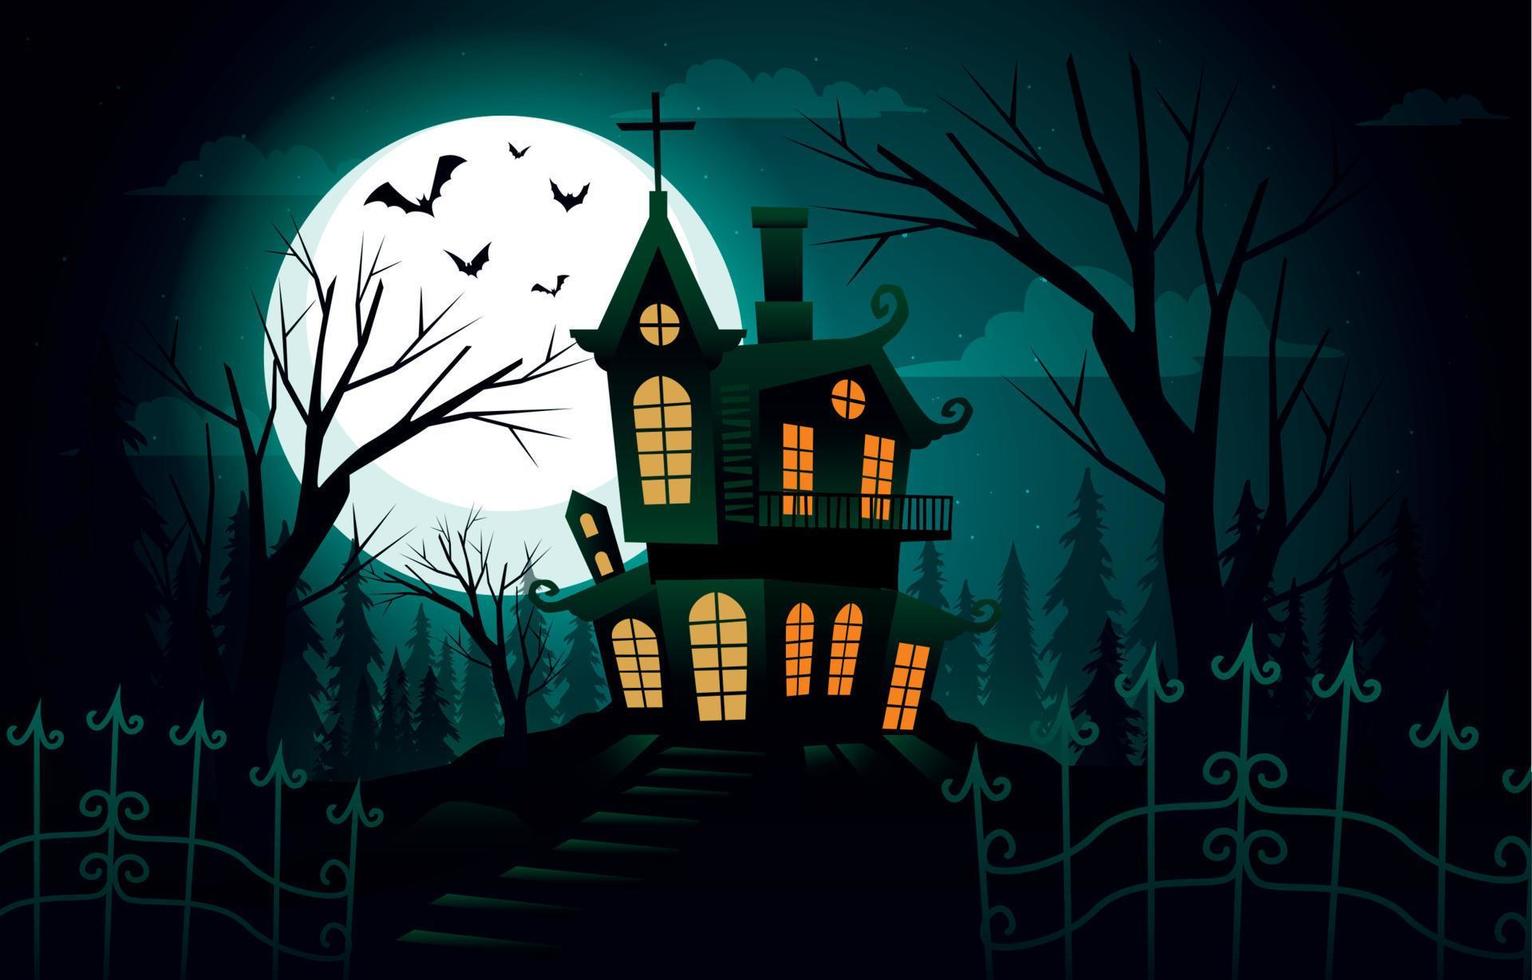 The Scary Haunted House vector